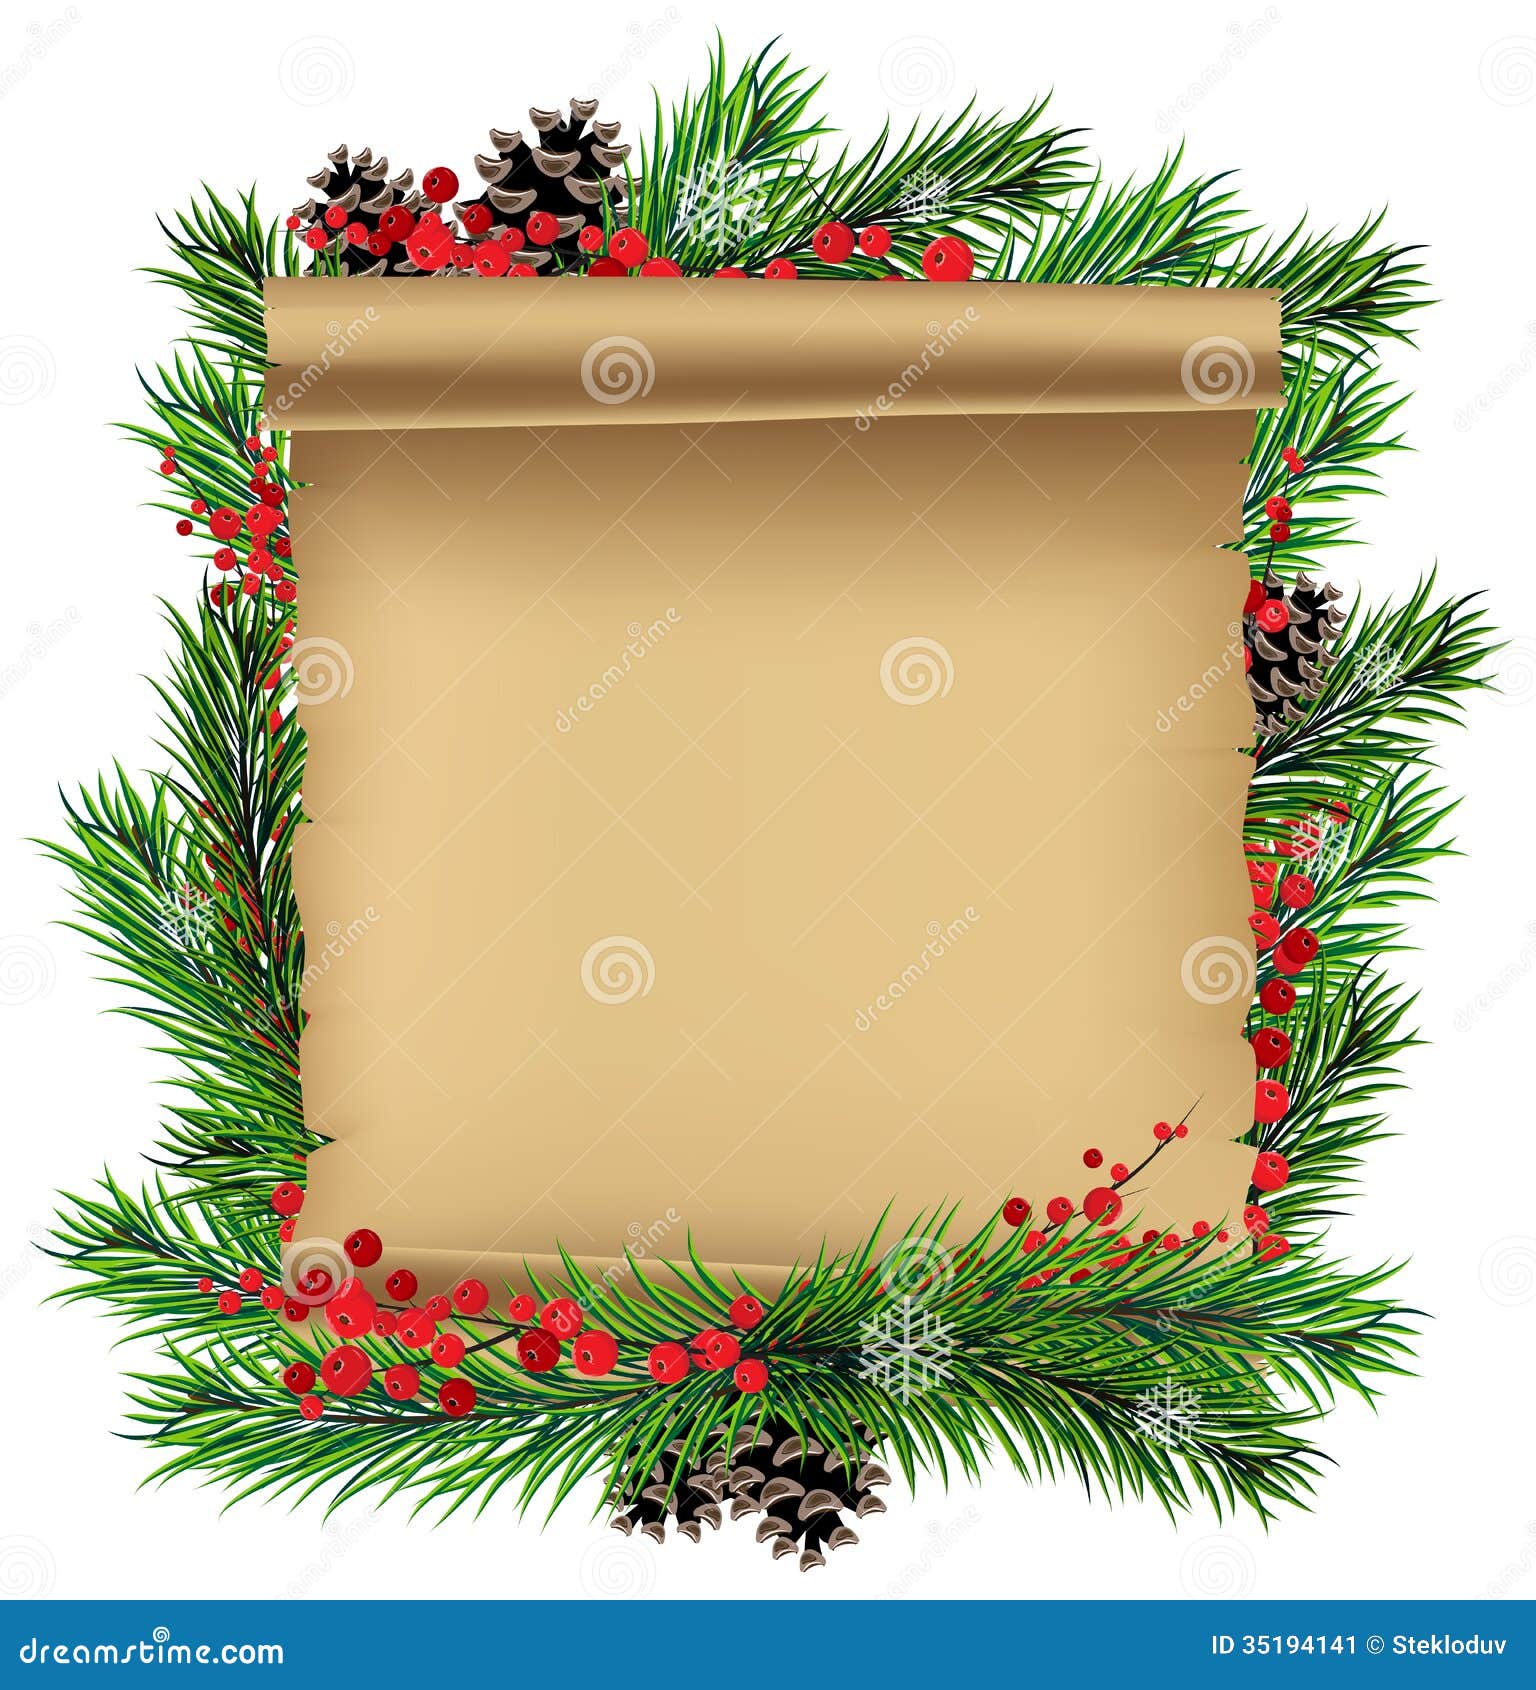 Scroll Paper With Spruce Branches Stock Image - Image 